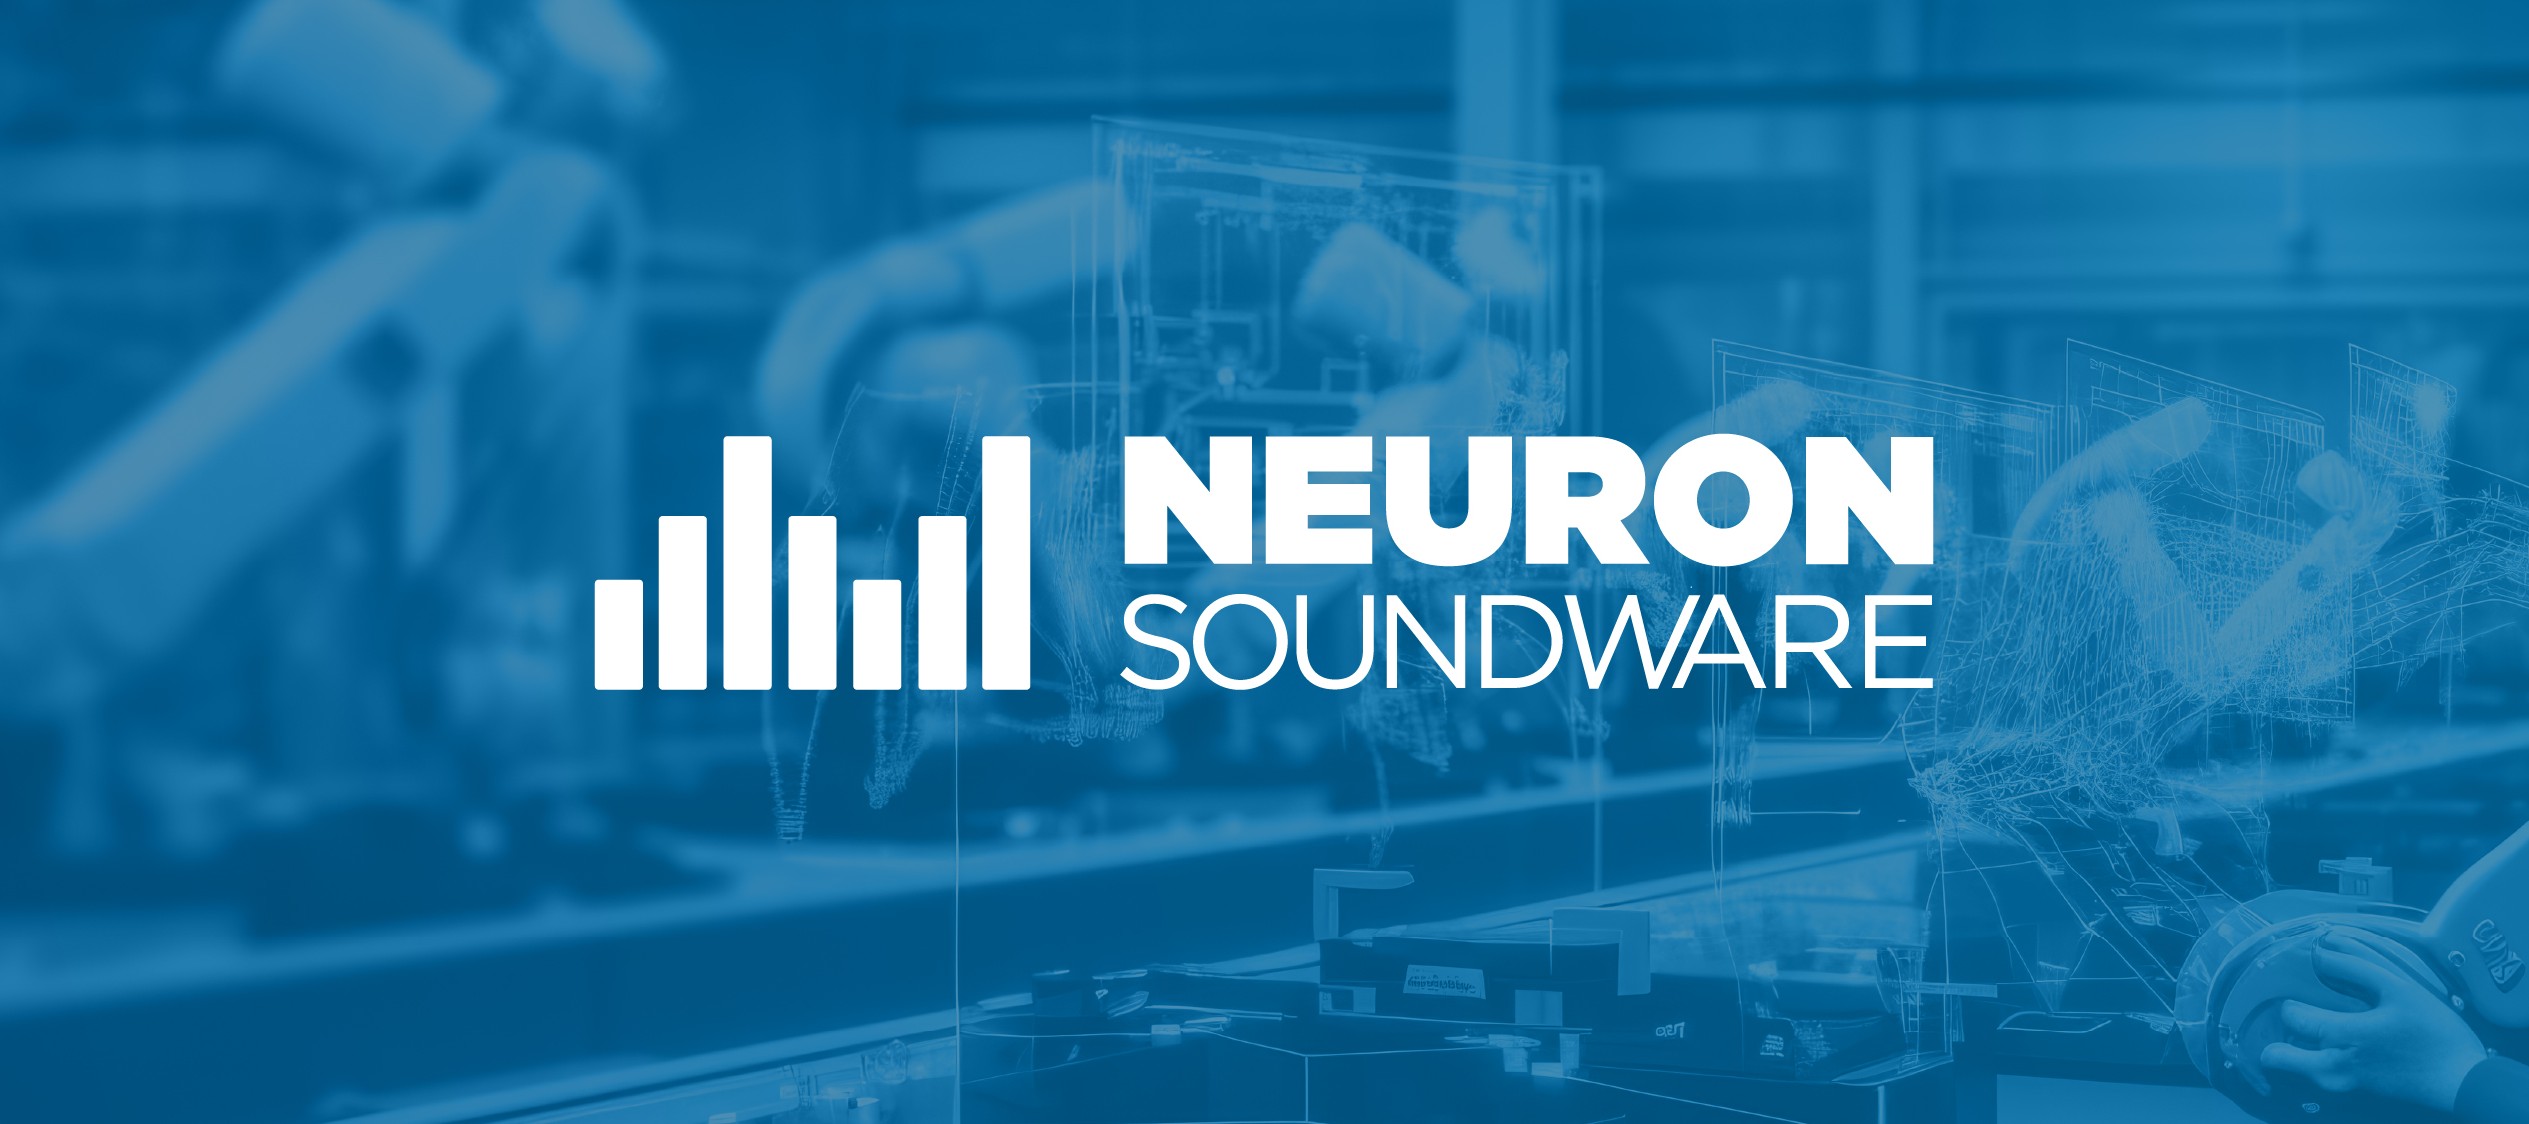 Neuron Soundware: Solutions for AI Innovations in Industry